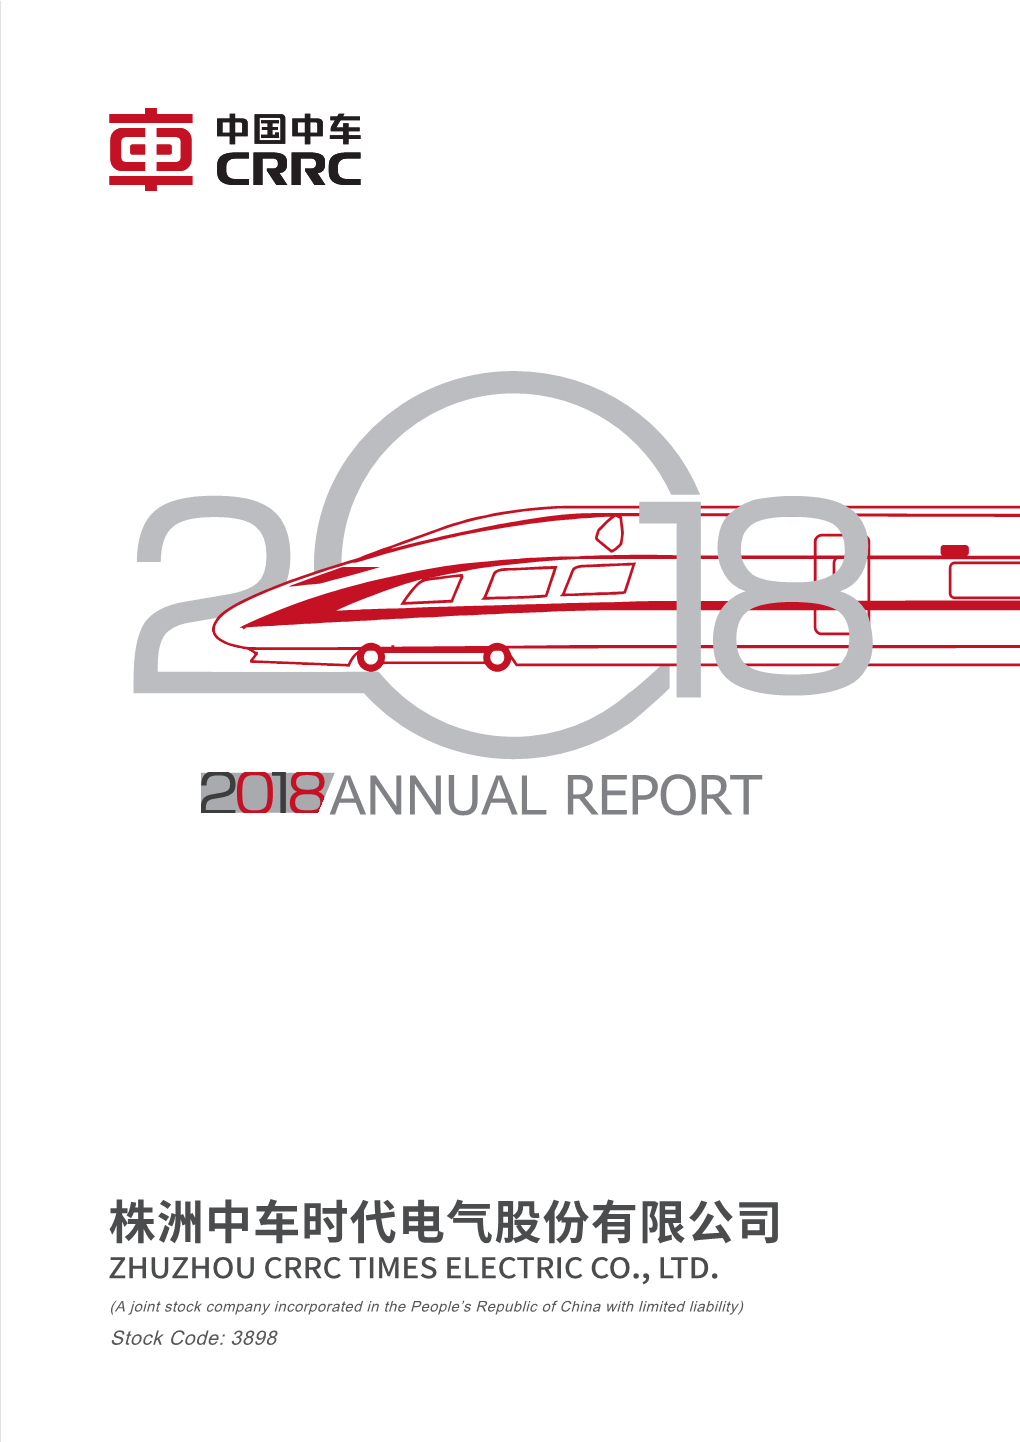 Annual Report Are Prepared Under PRC Accounting Standards; 2